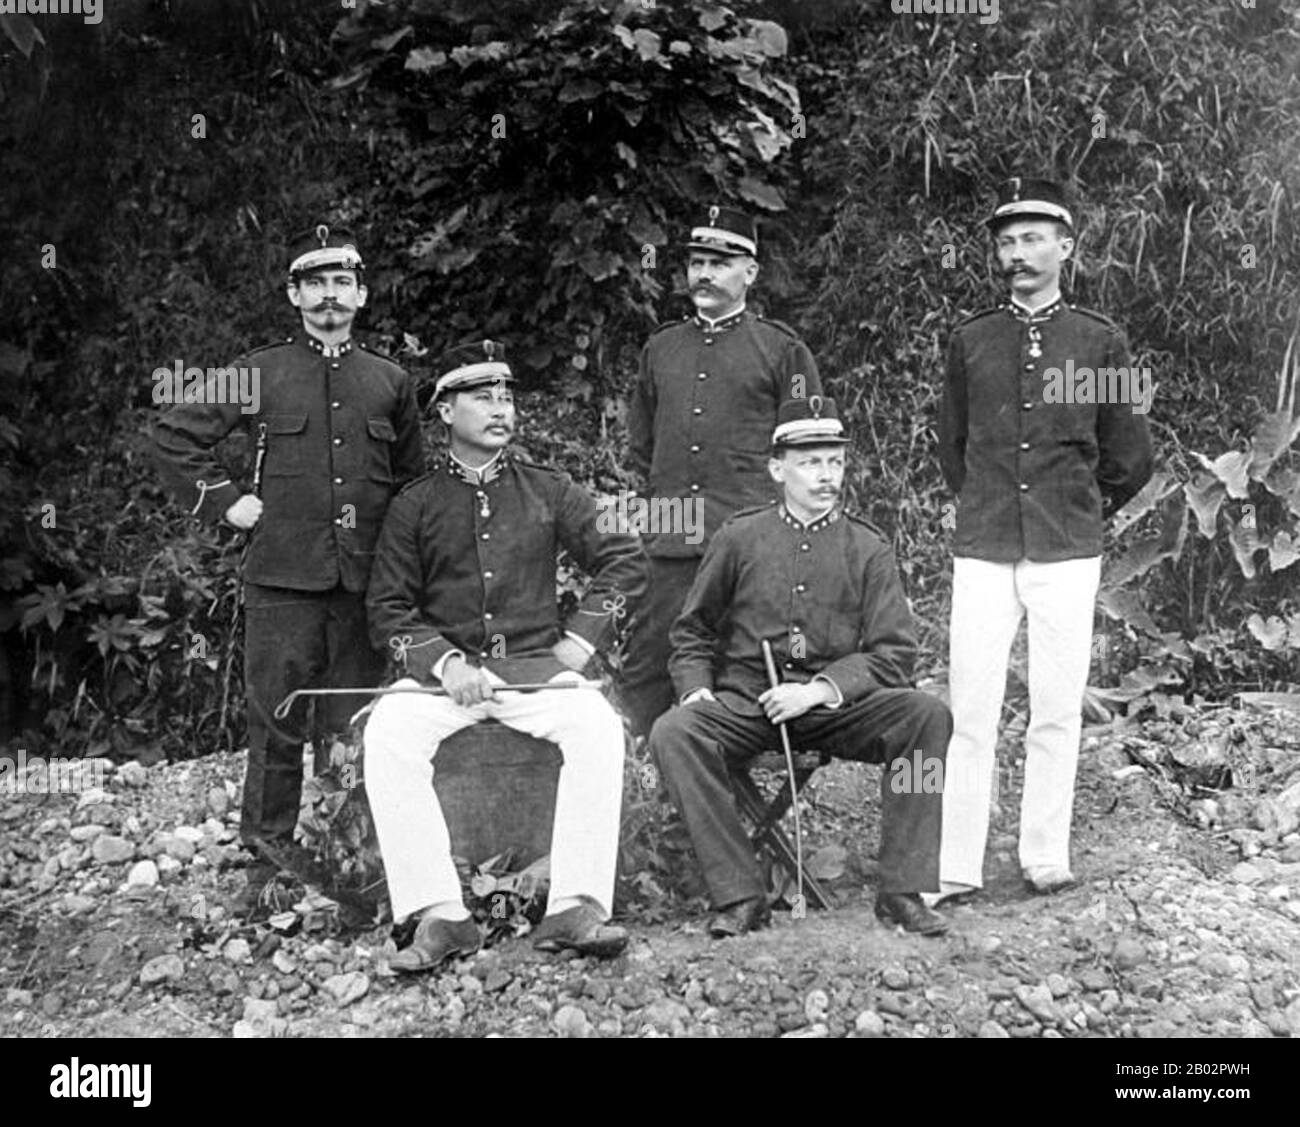 The Aceh War, also known as the Dutch War or the Infidel War (1873–1914), was an armed military conflict between the Sultanate of Aceh and the Netherlands which was triggered by discussions between representatives of Aceh and the United Kingdom in Singapore during early 1873.  The war was part of a series of conflicts in the late 19th century that consolidated Dutch rule over modern-day Indonesia.  Gotfried Coenraad Ernst Frits van Daalen (23 March 1863 – 22 February 1930) was an 'Indo' (Eurasian) Lieutenant General of the Royal Dutch East Indies Army who served in the Dutch East Indies.  Van Stock Photo